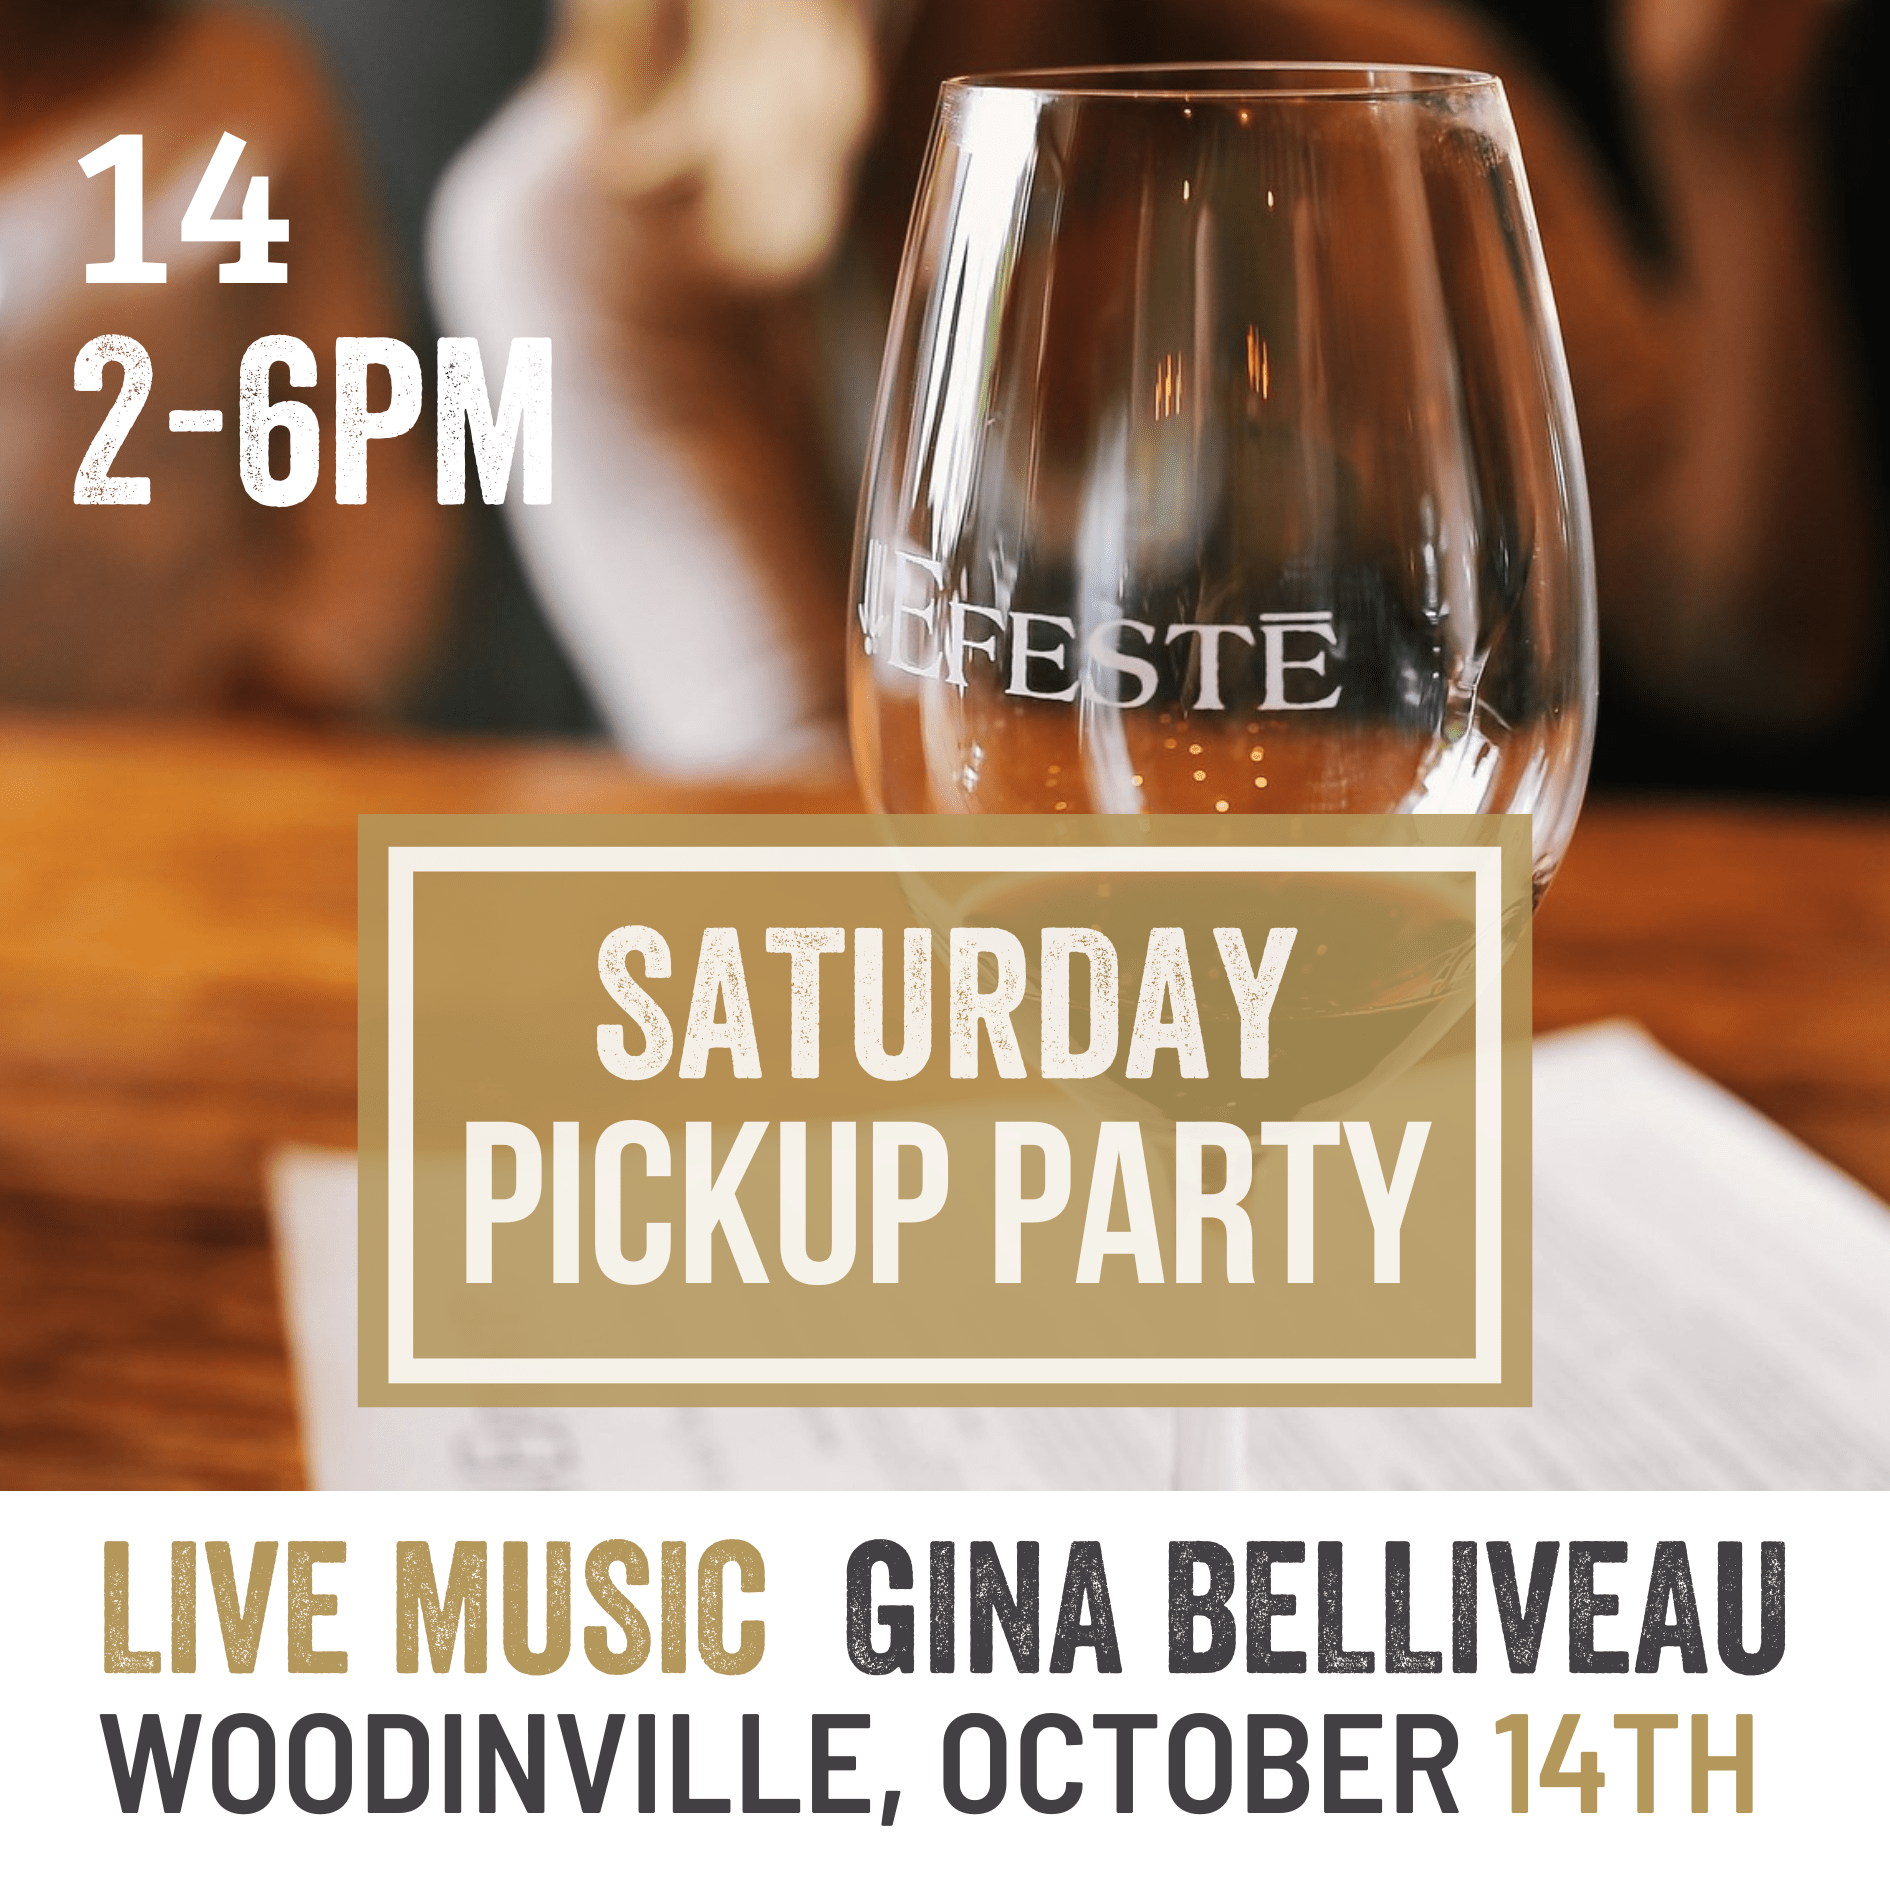 Club Pick-up Party EFESTE Woodinville with Gina Belliveau